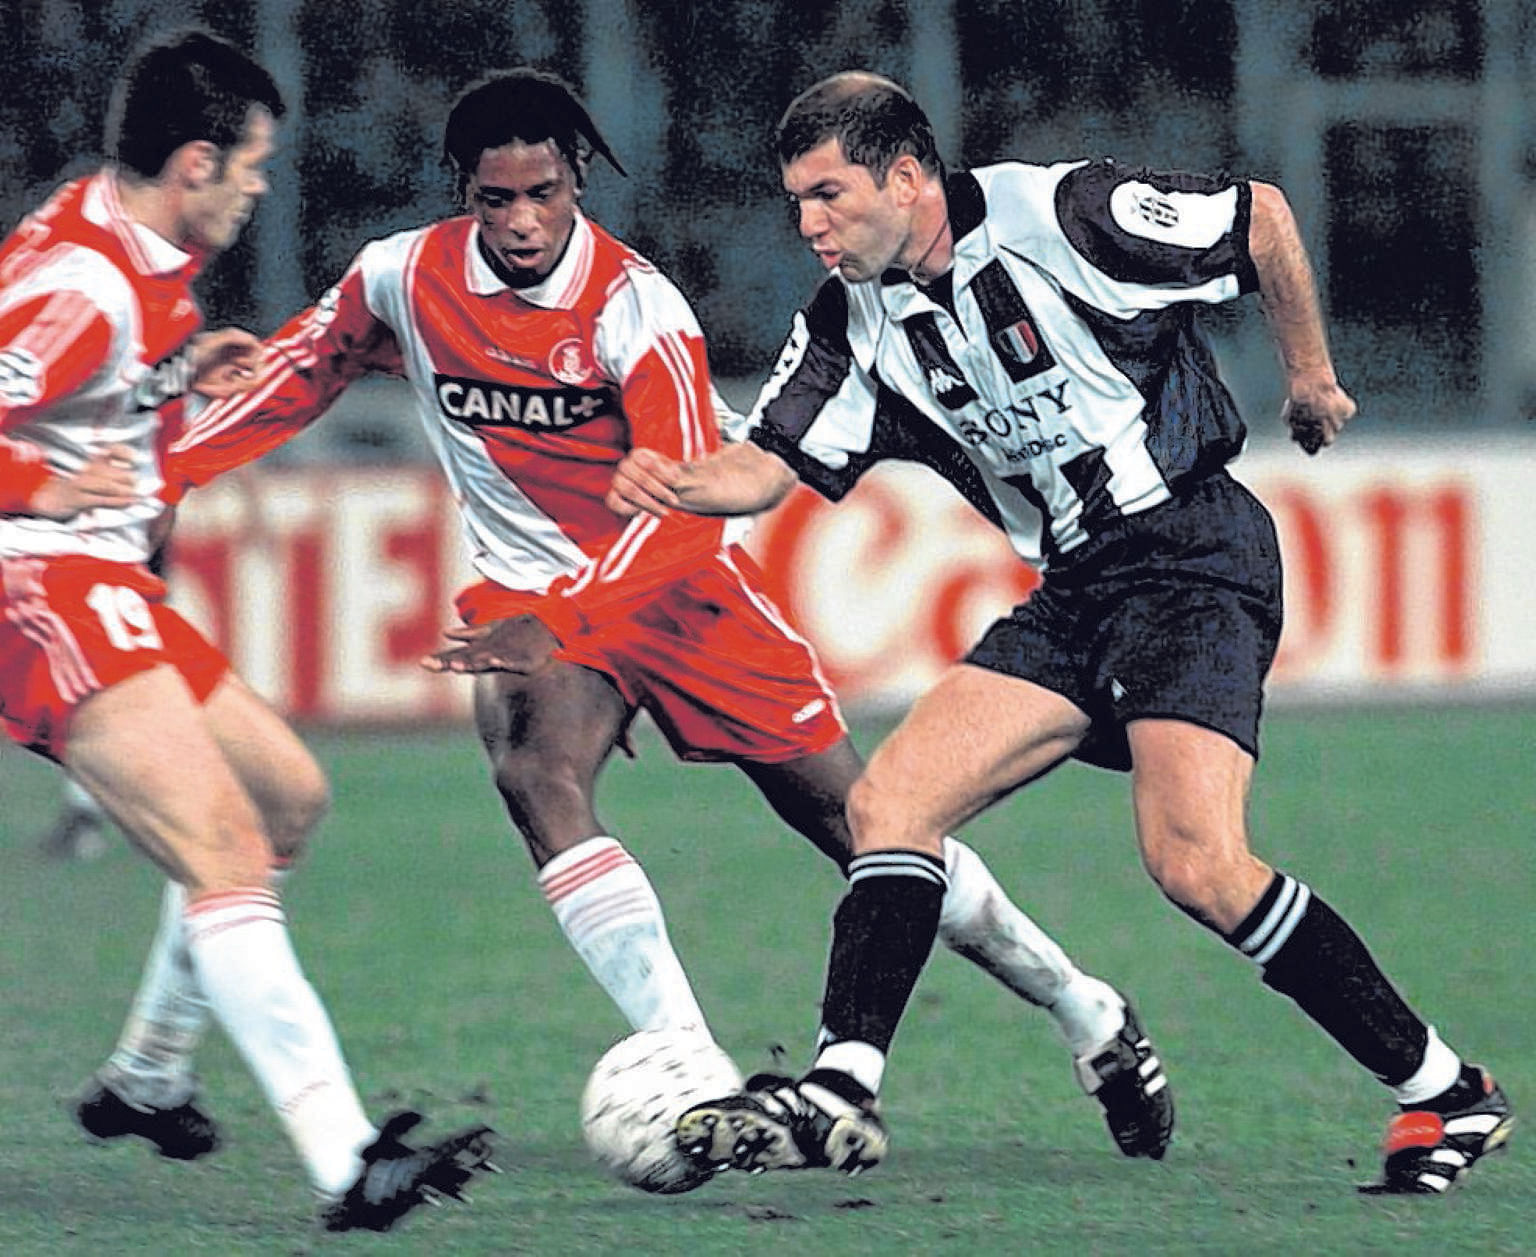 Former Juventus favourite Zinedine Zidane (right) playing for the Italian side in the Champions League in 1998. The Frenchman will be looking to break Bianconeri hearts, with the Real Madrid coach aiming to be the mastermind behind his former team's 